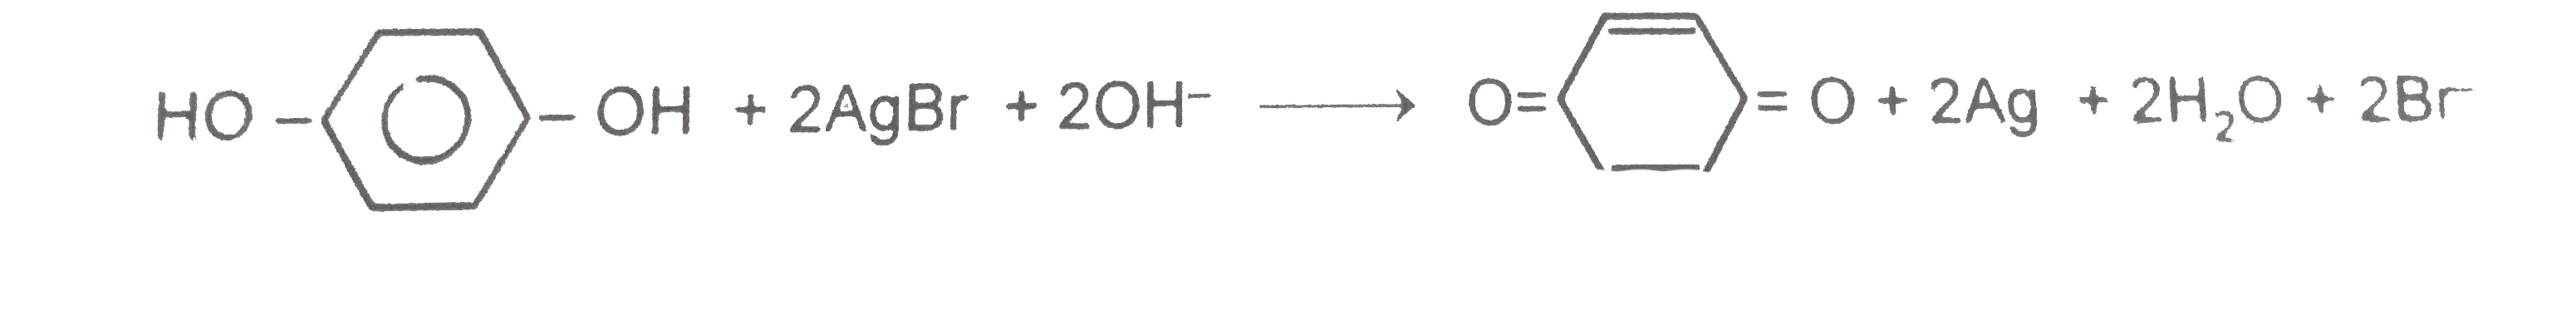 In photography , quinol is used as developer accoding to following reaction.     Which of the following describes(s) the role of quinol in this reaction?